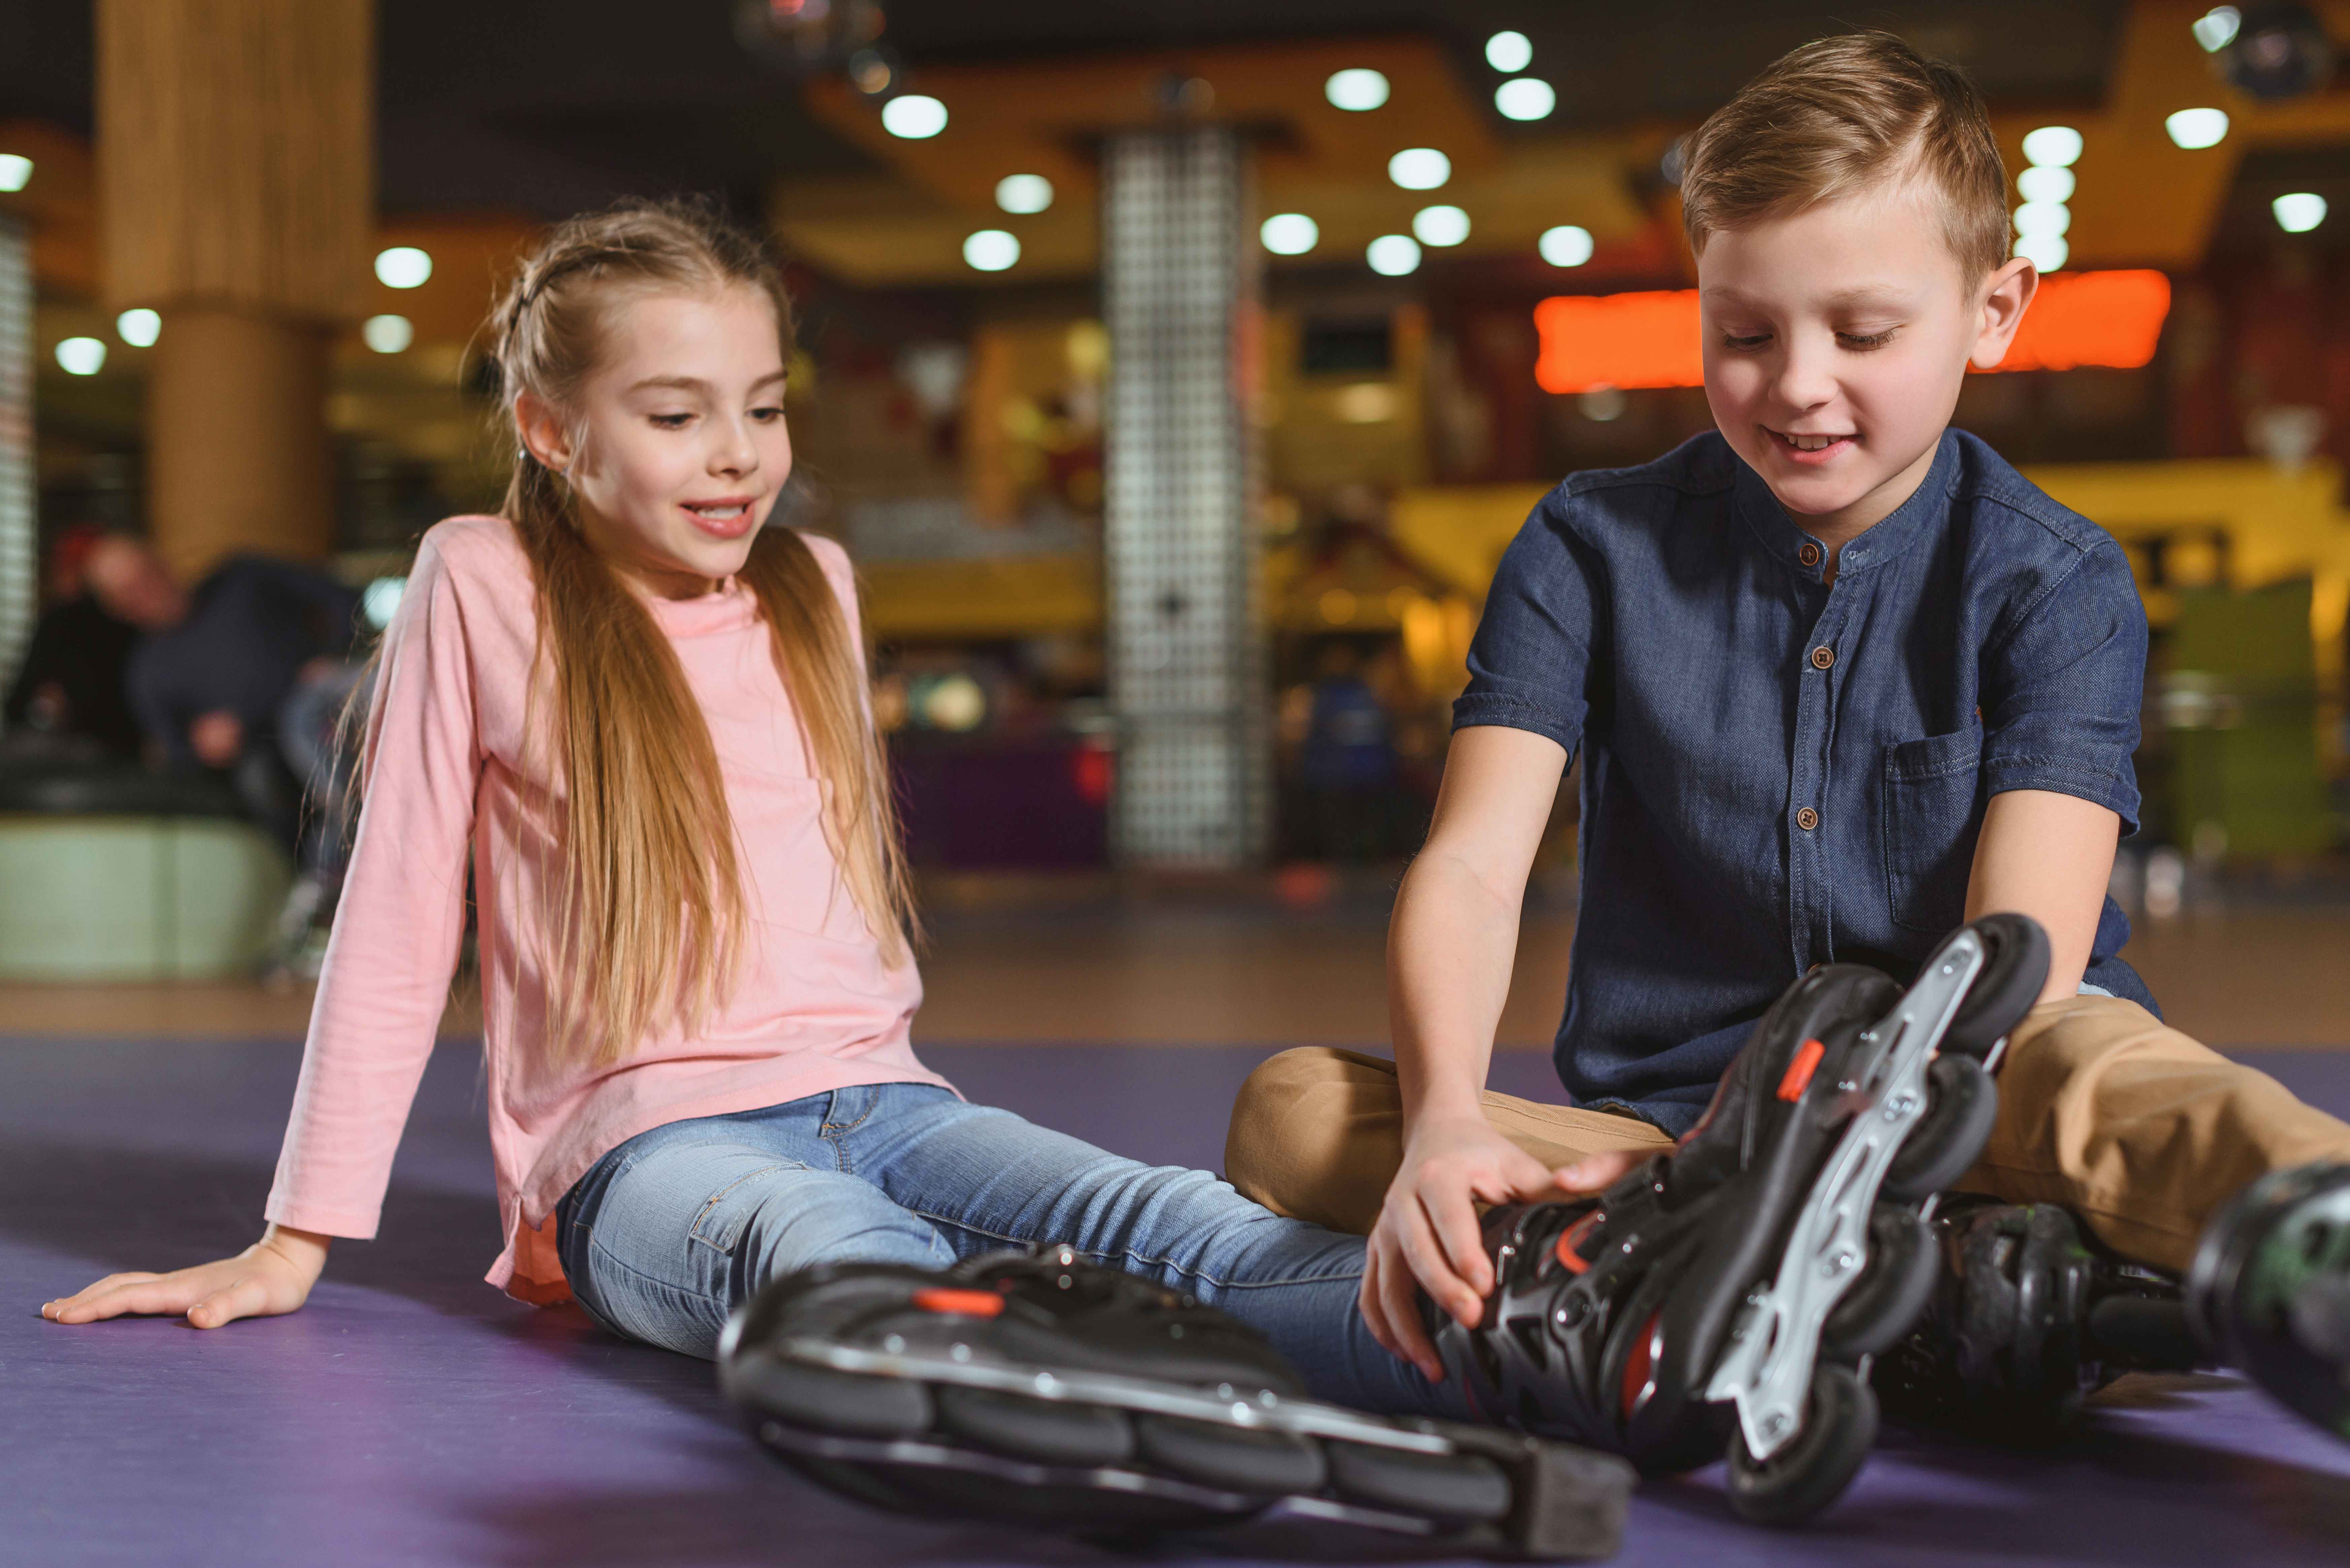 Two kids sitting on the floor of a roller rink with their rollerblades on.